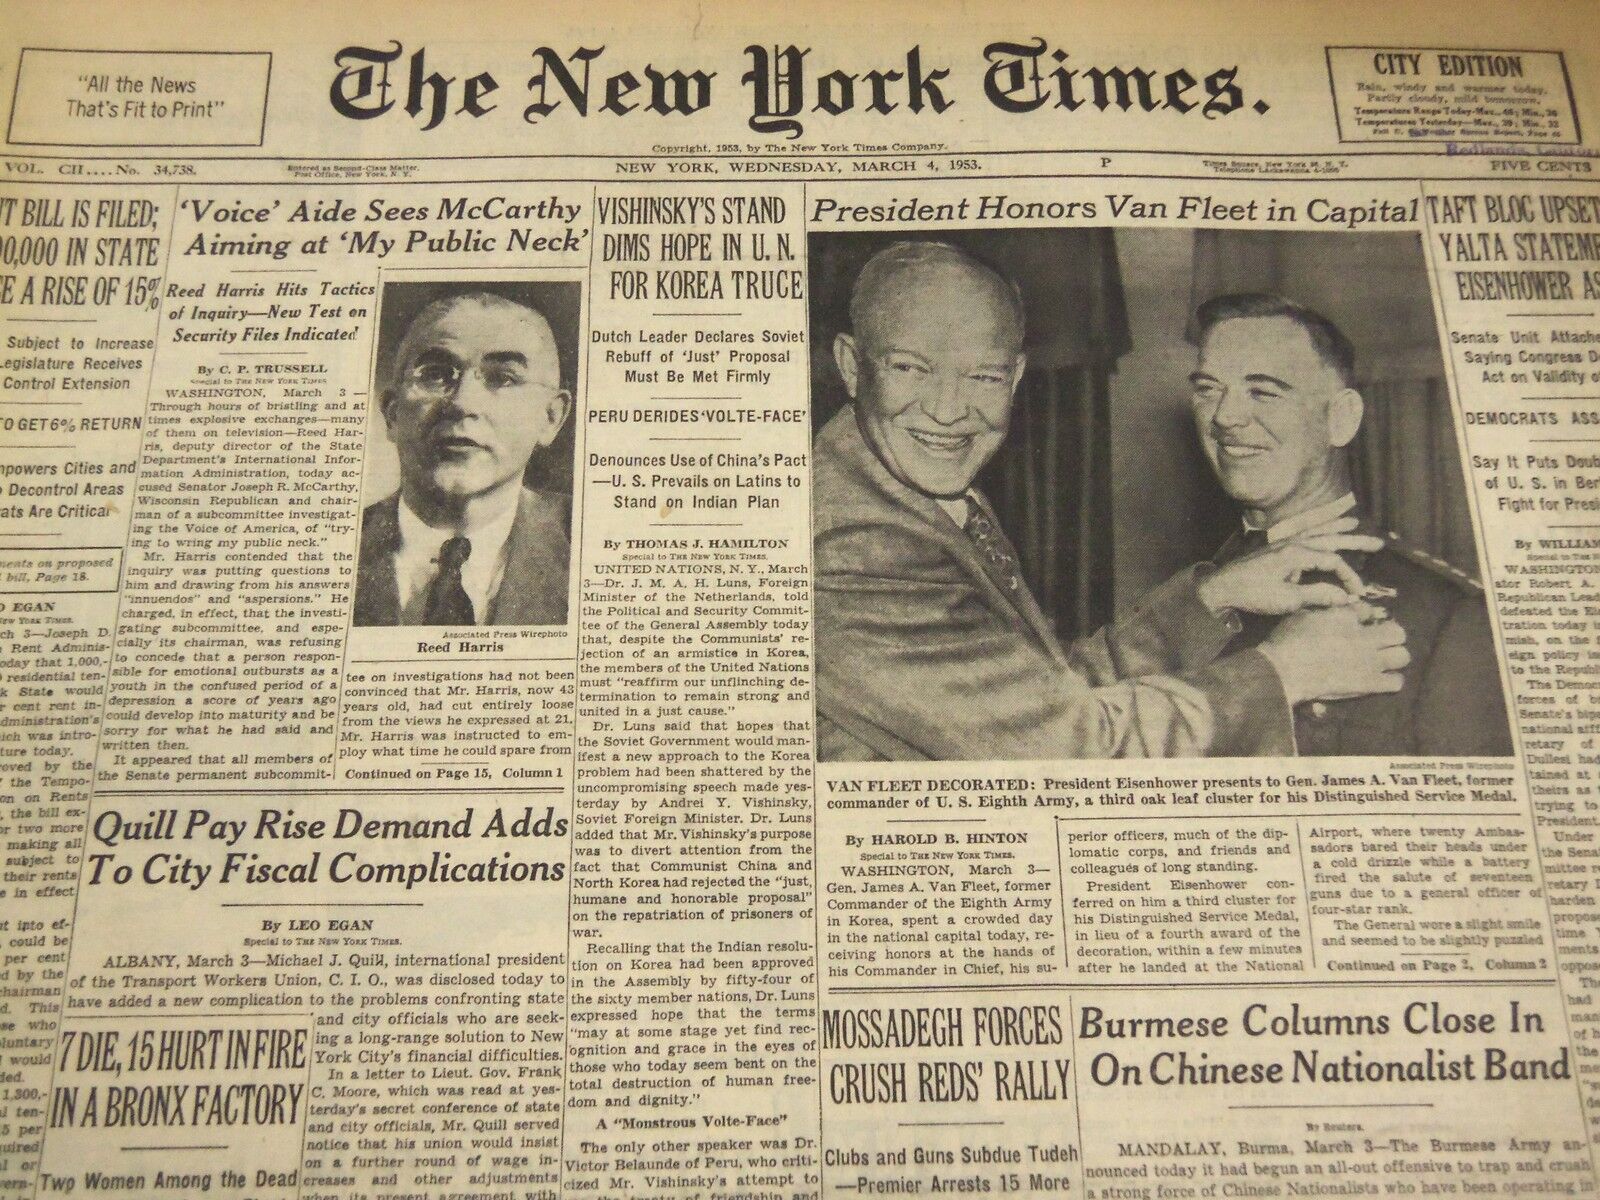 1953 MARCH 4 NEW YORK TIMES - REED HARRIS HITS MCCARTHY TACTICS - NT 4662